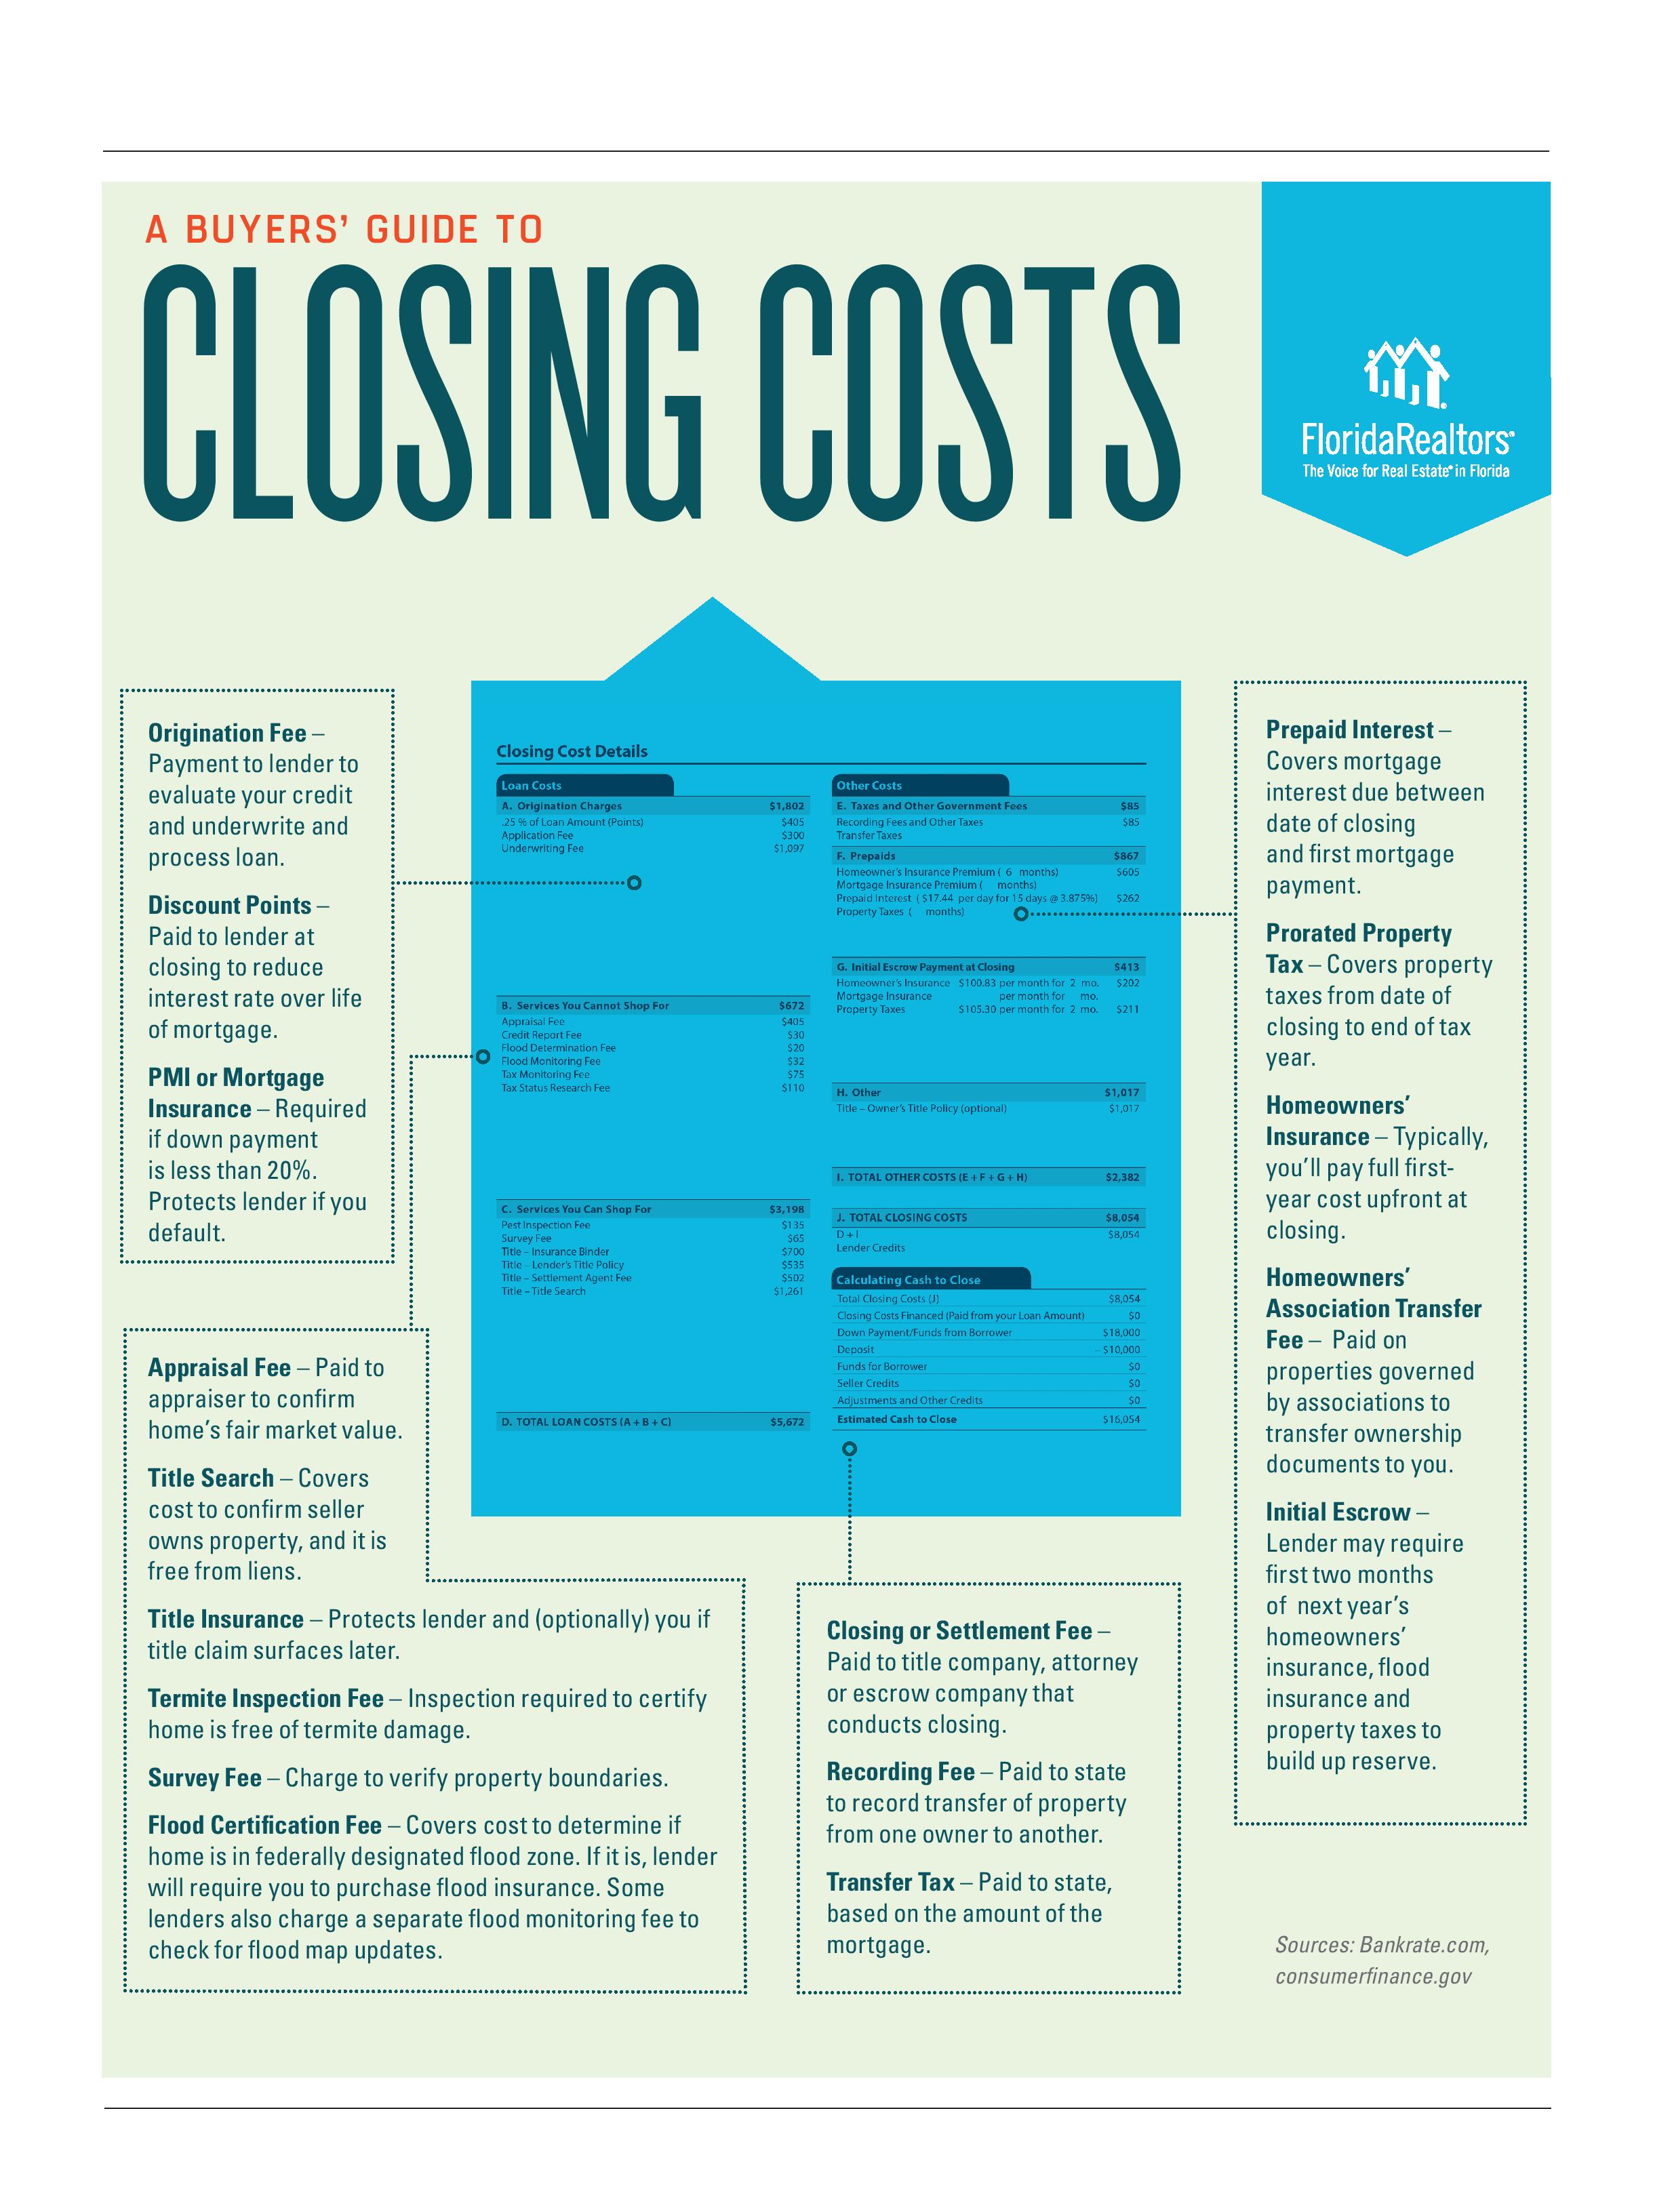 Buyers Guide to Closing Costs-page-001.jpg